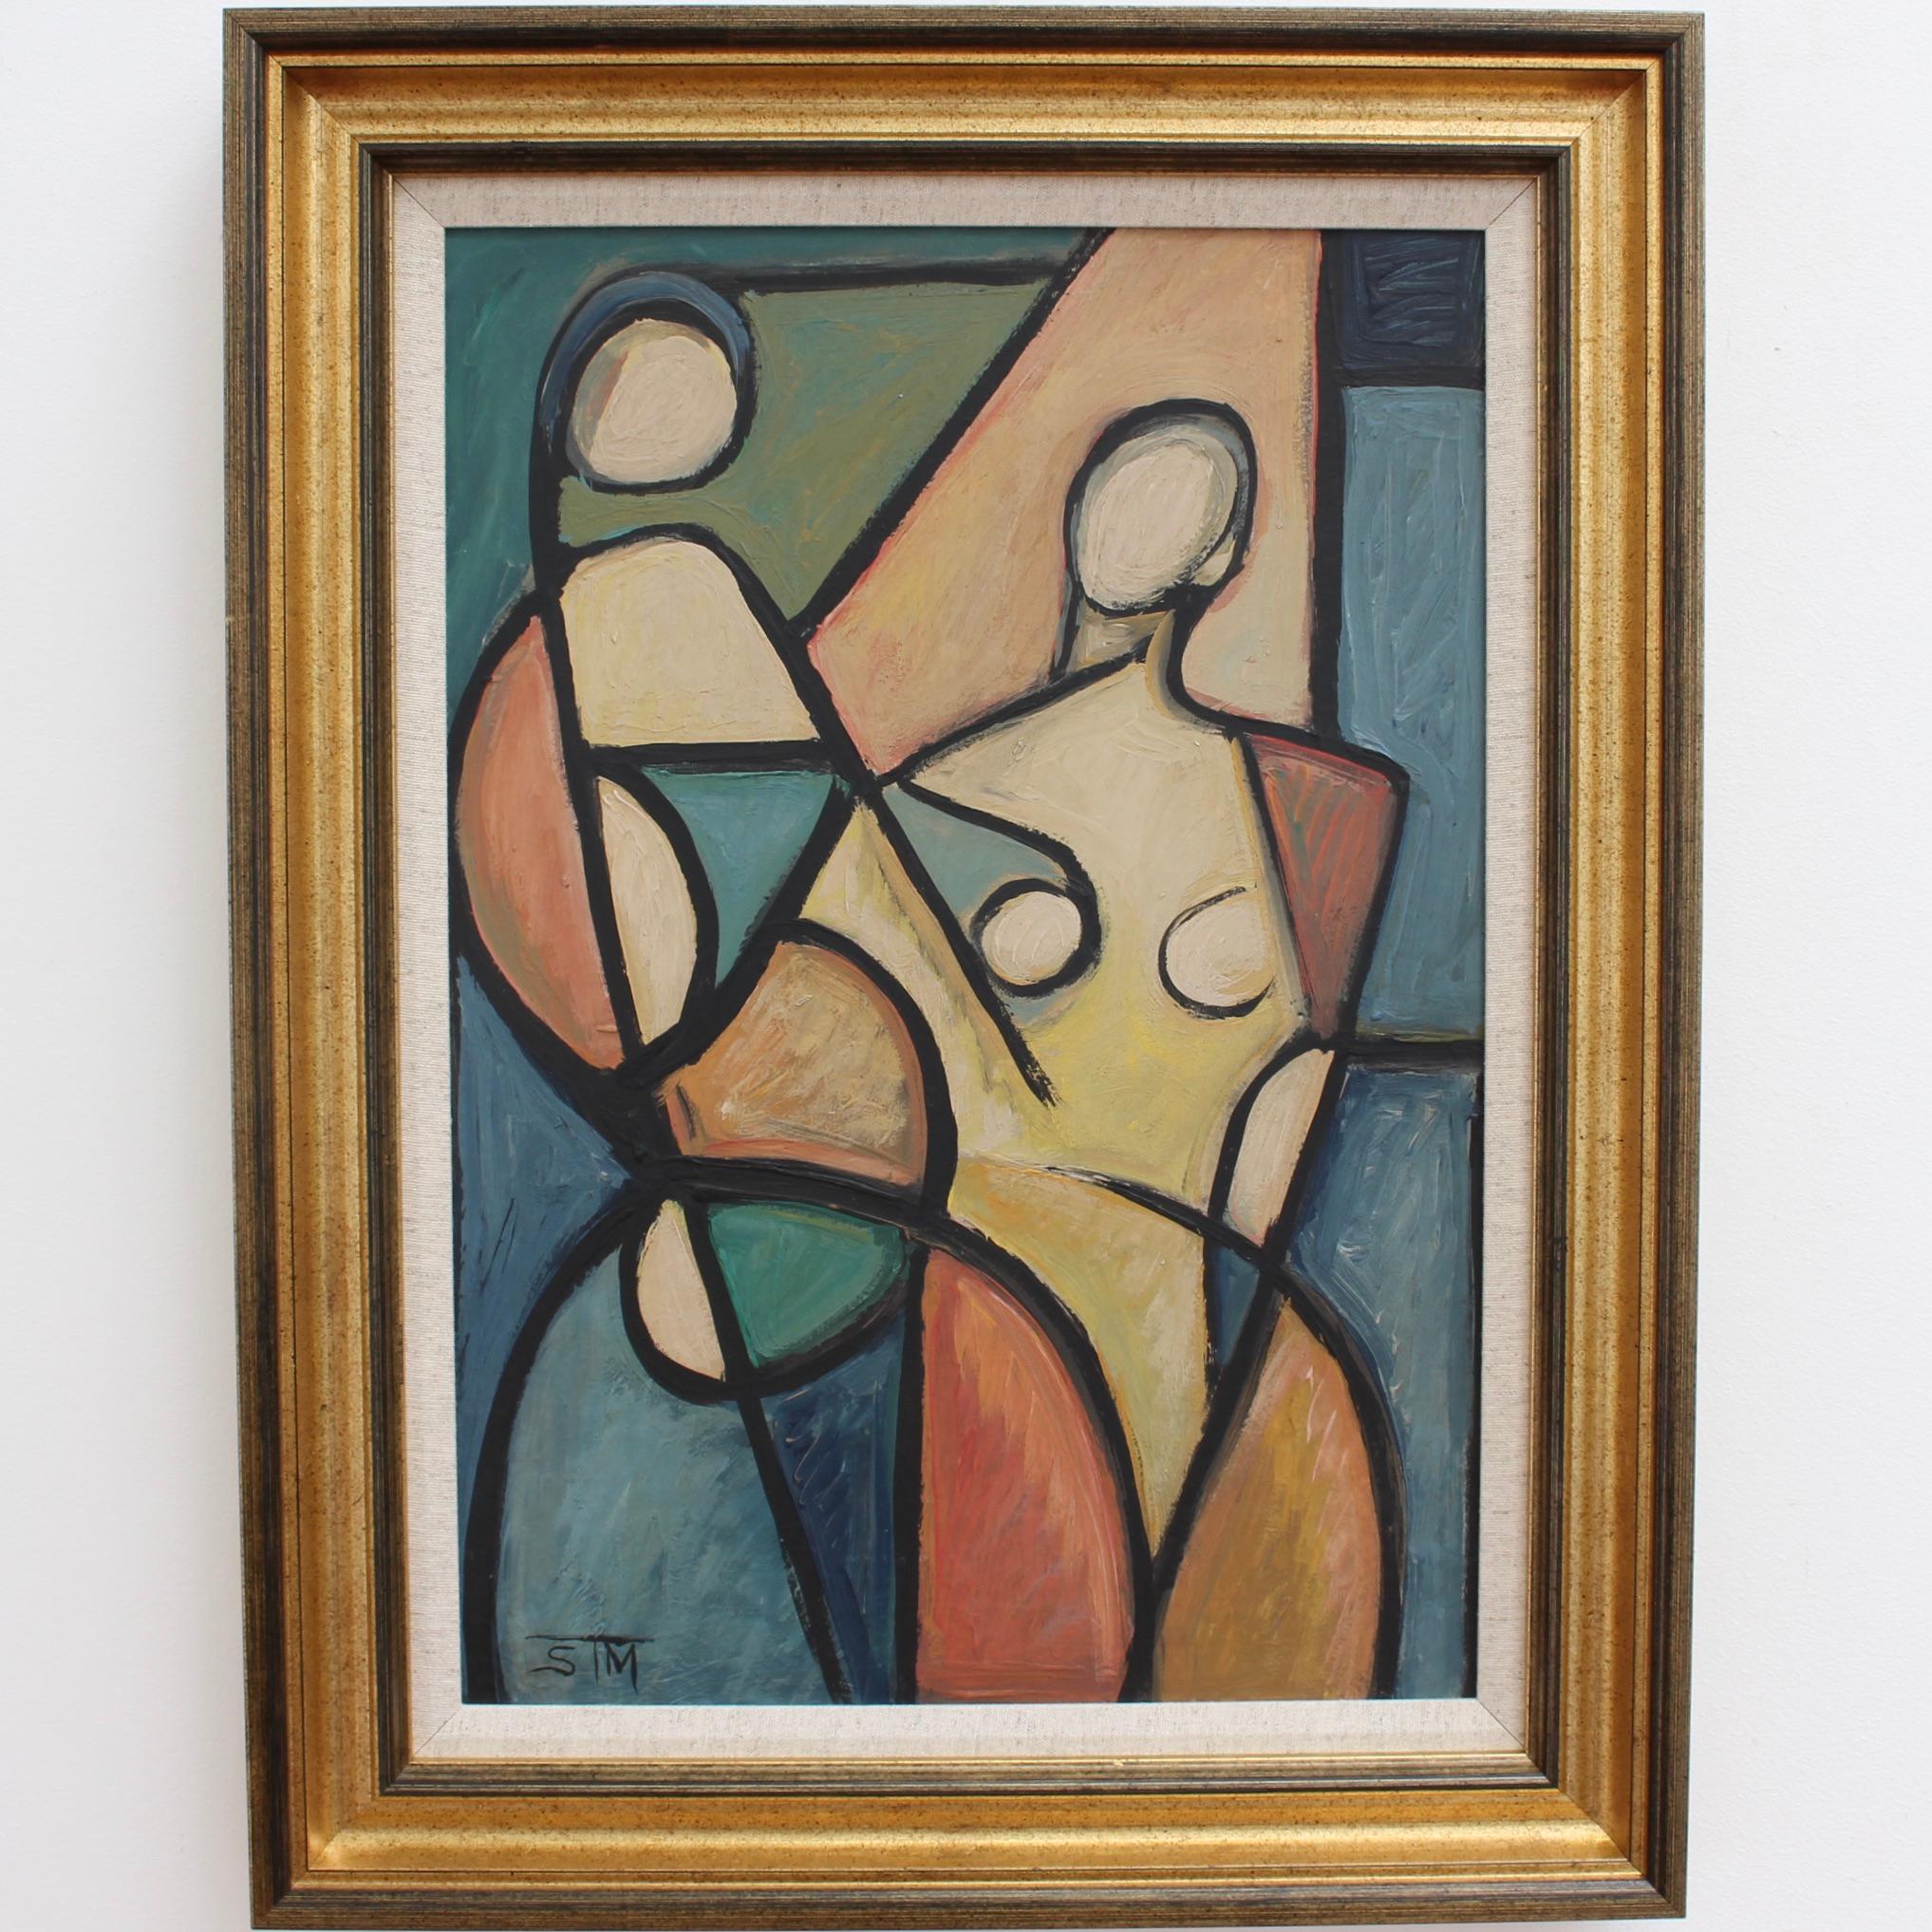 Cubist Figures in Colour - Painting by STM